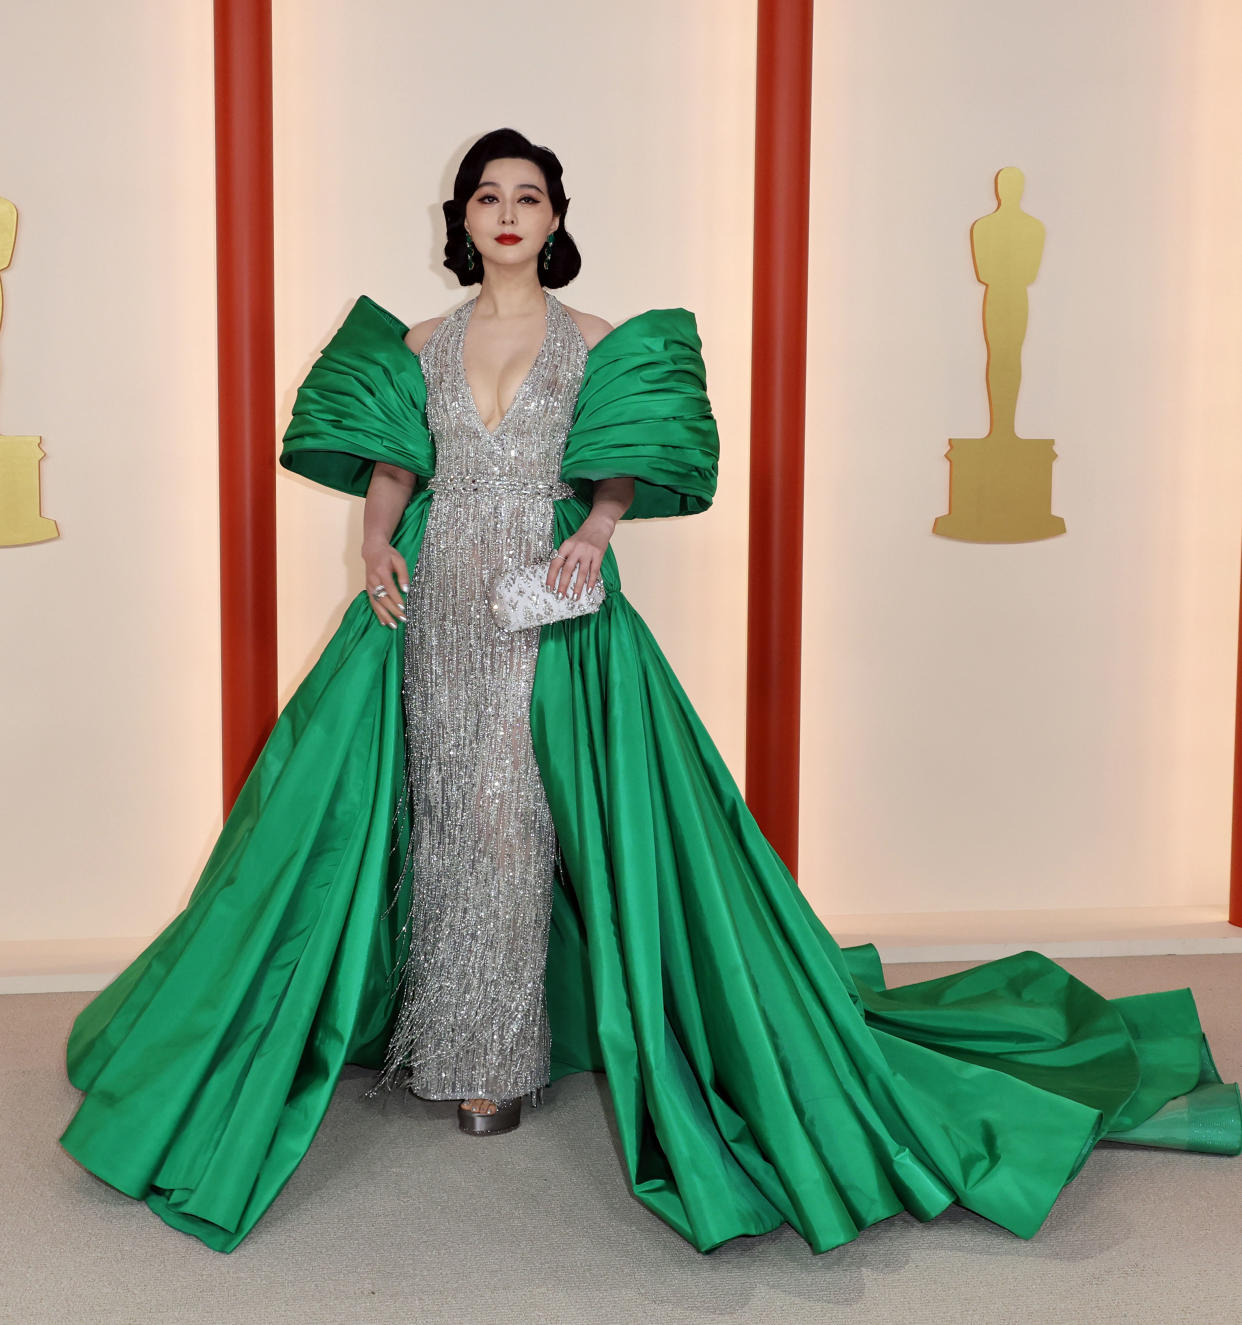 HOLLYWOOD, CA - MARCH 12:  Fan Bingbing attends the 95th Academy Awards at the Dolby Theater on March 12, 2023 in Hollywood, California. (Allen J. Schaben / Los Angeles Times via Getty Images)